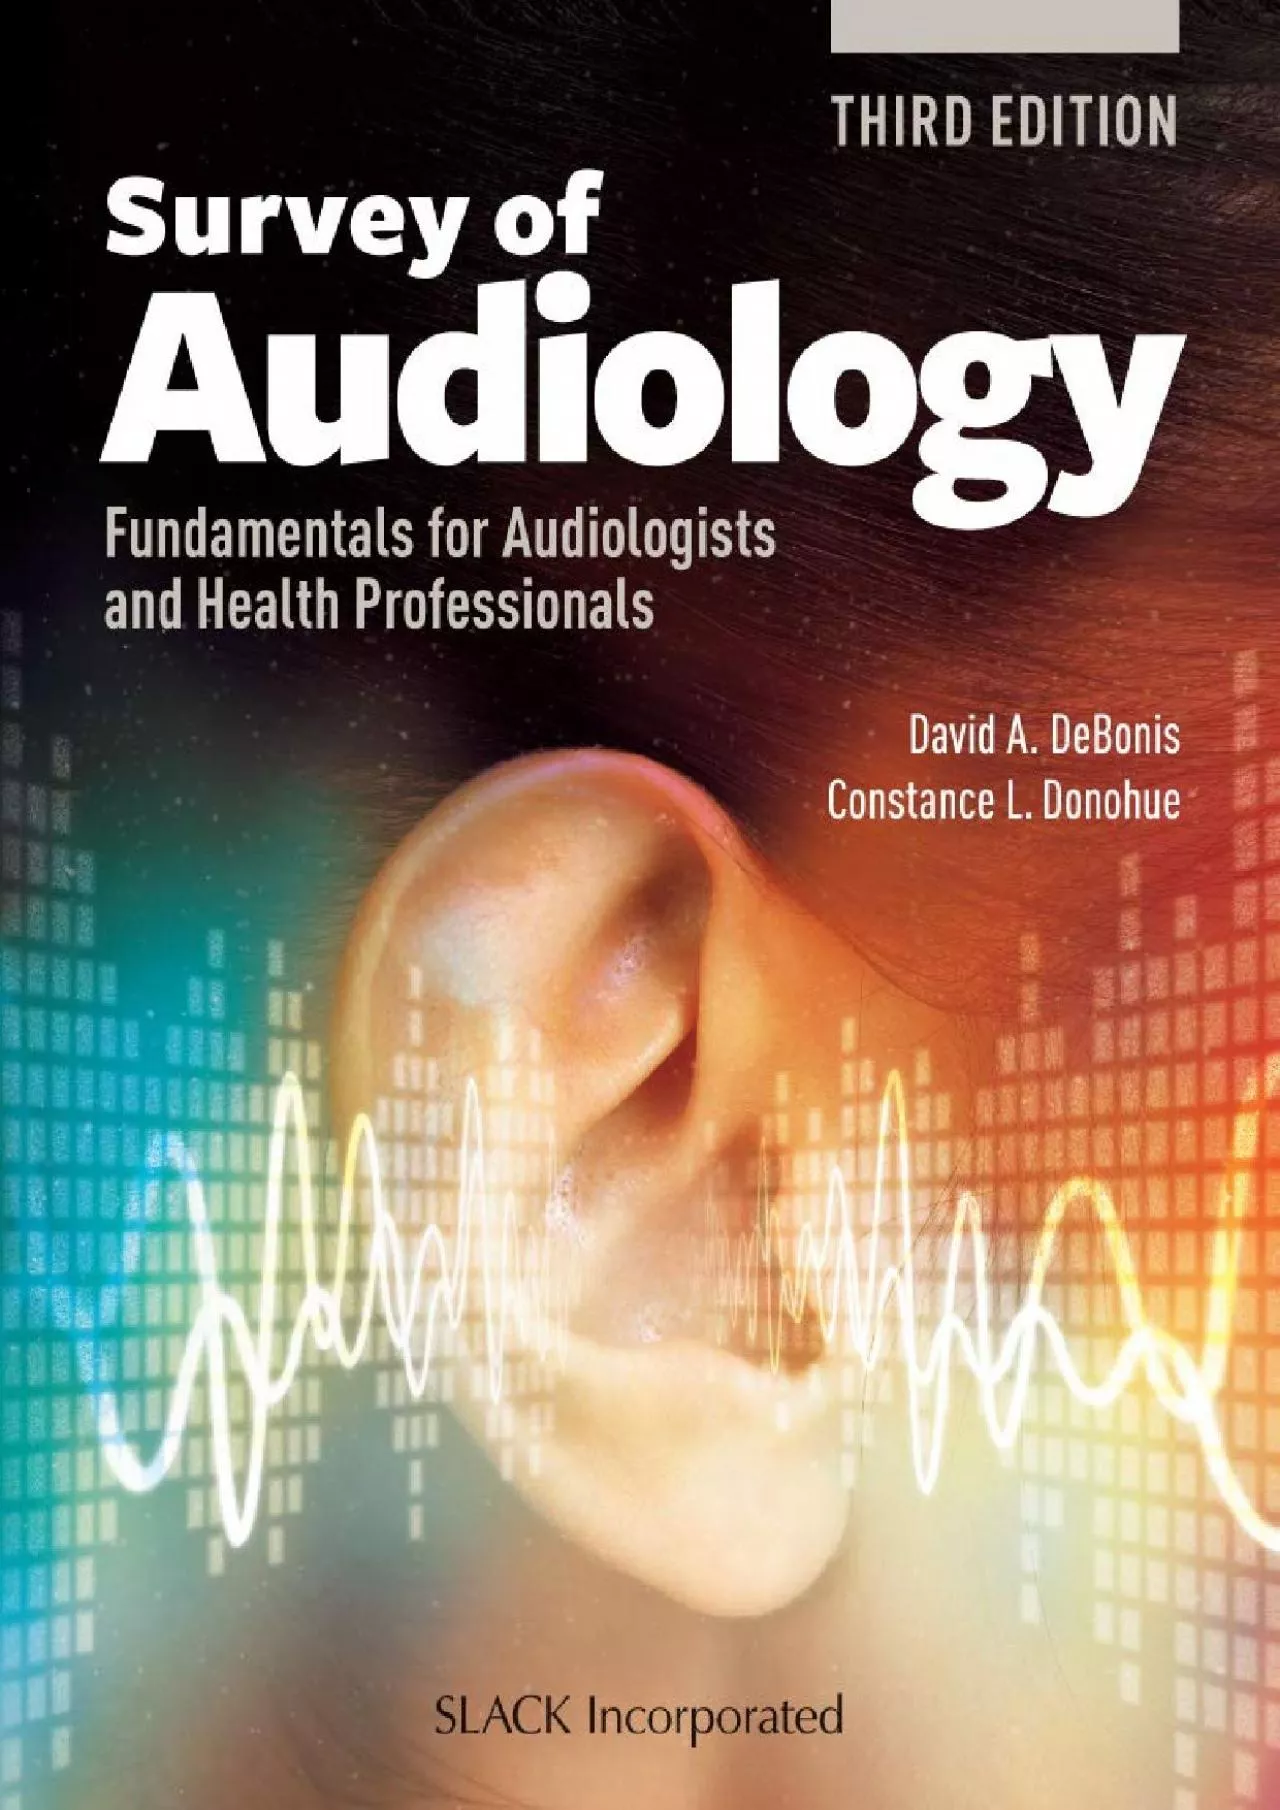 (DOWNLOAD)-Survey of Audiology: Fundamentals for Audiologists and Health Professionals,